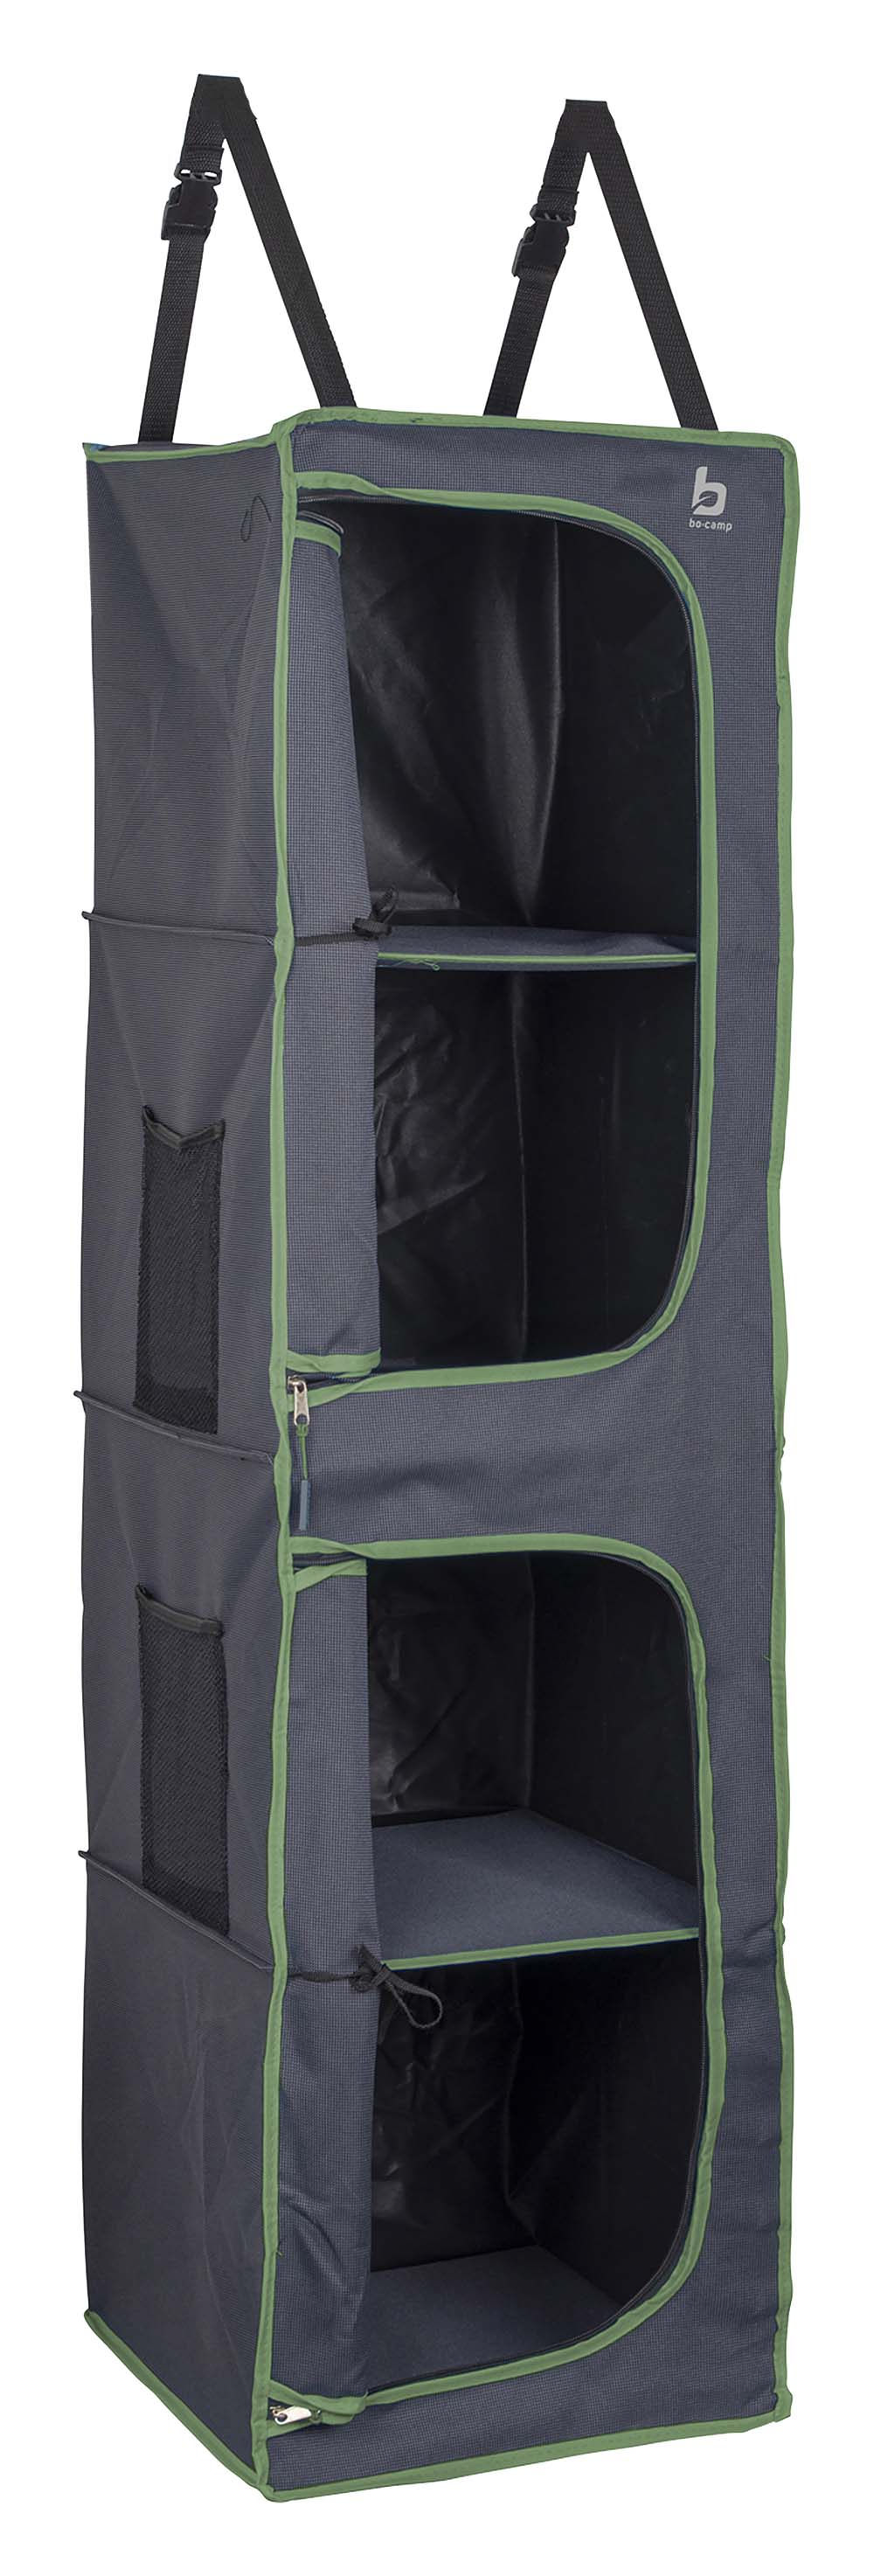 1709380 A 4 compartment hanging wardrobe. Has 4 spacious compartments which can be locked with the rollable doors. This organiser can be hung with straps to the tent pole. The loops at the bottom provide additional fixation. Made from an extra sturdy Two-Tone 600D Oxford Polyester.